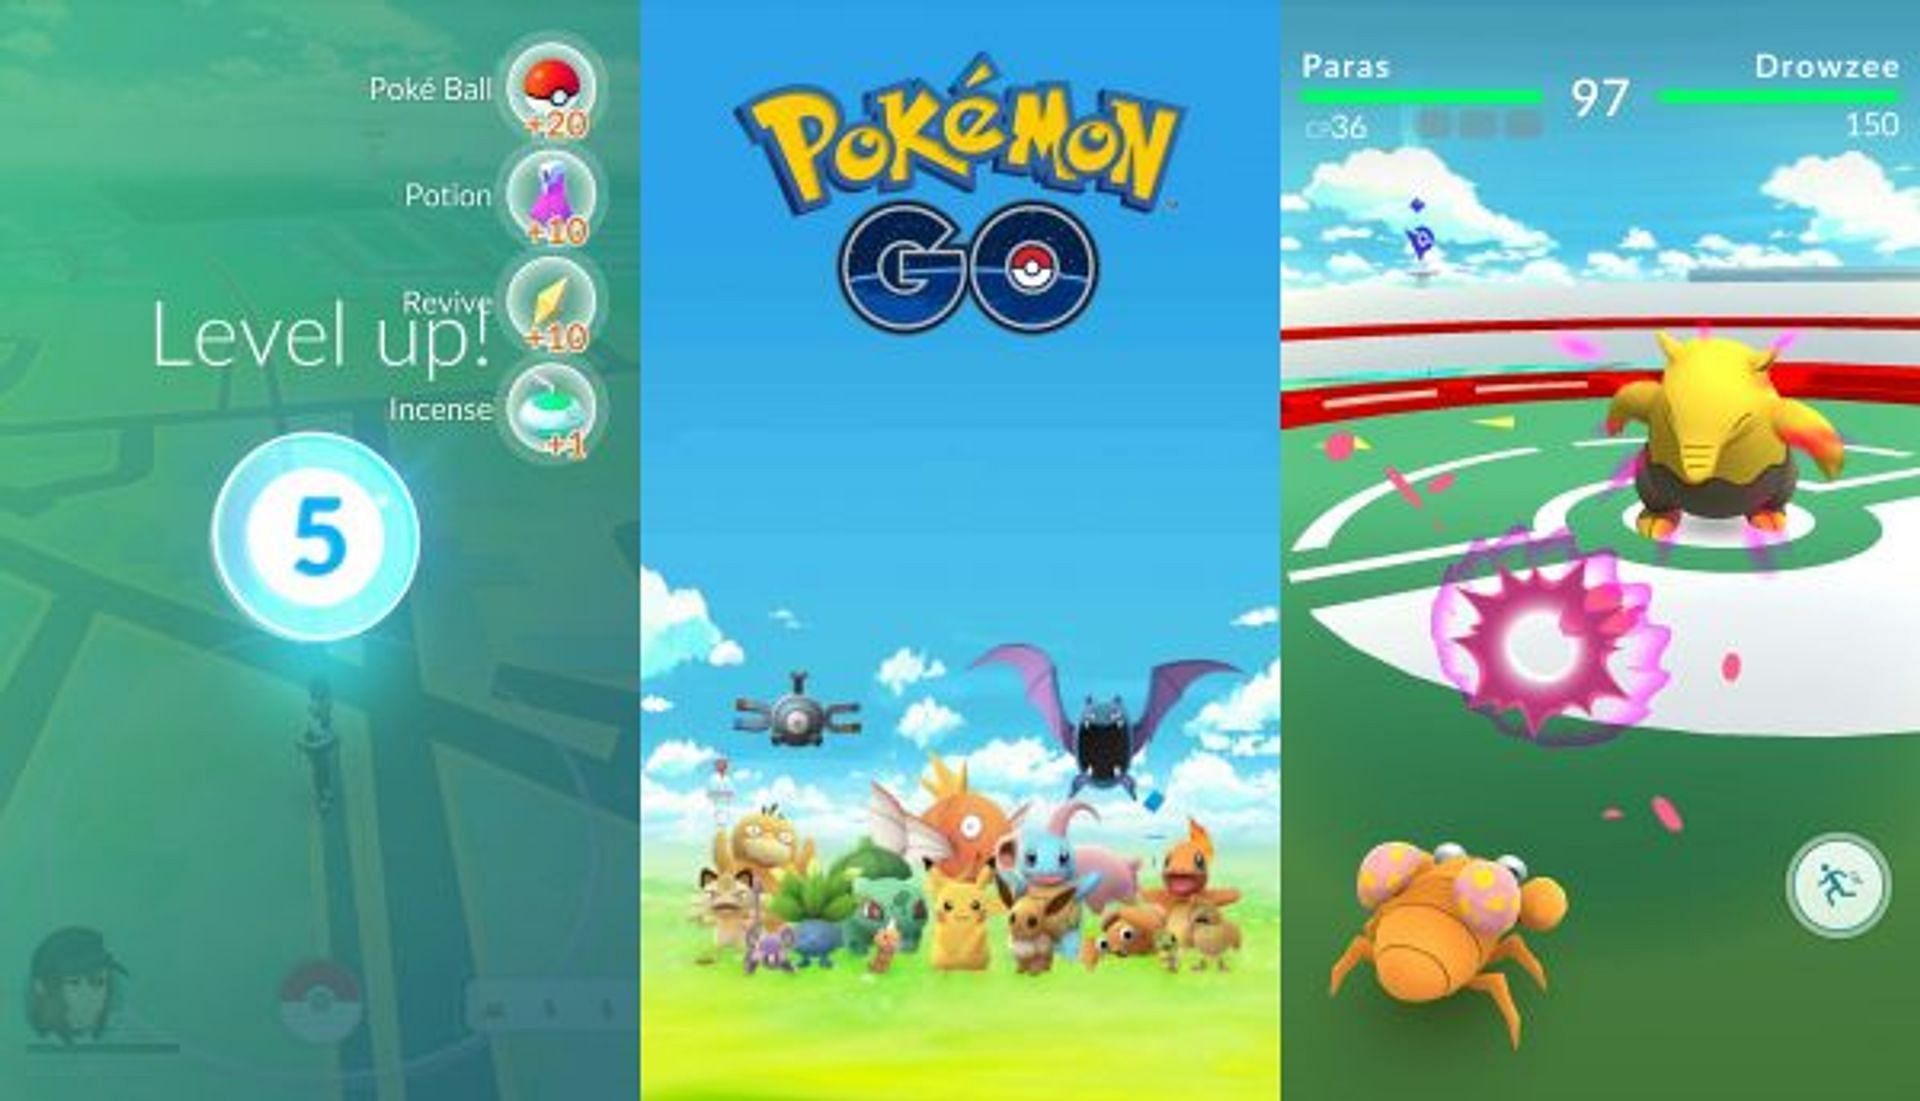 A player leveling up in Pokemon GO (Image via Niantic)